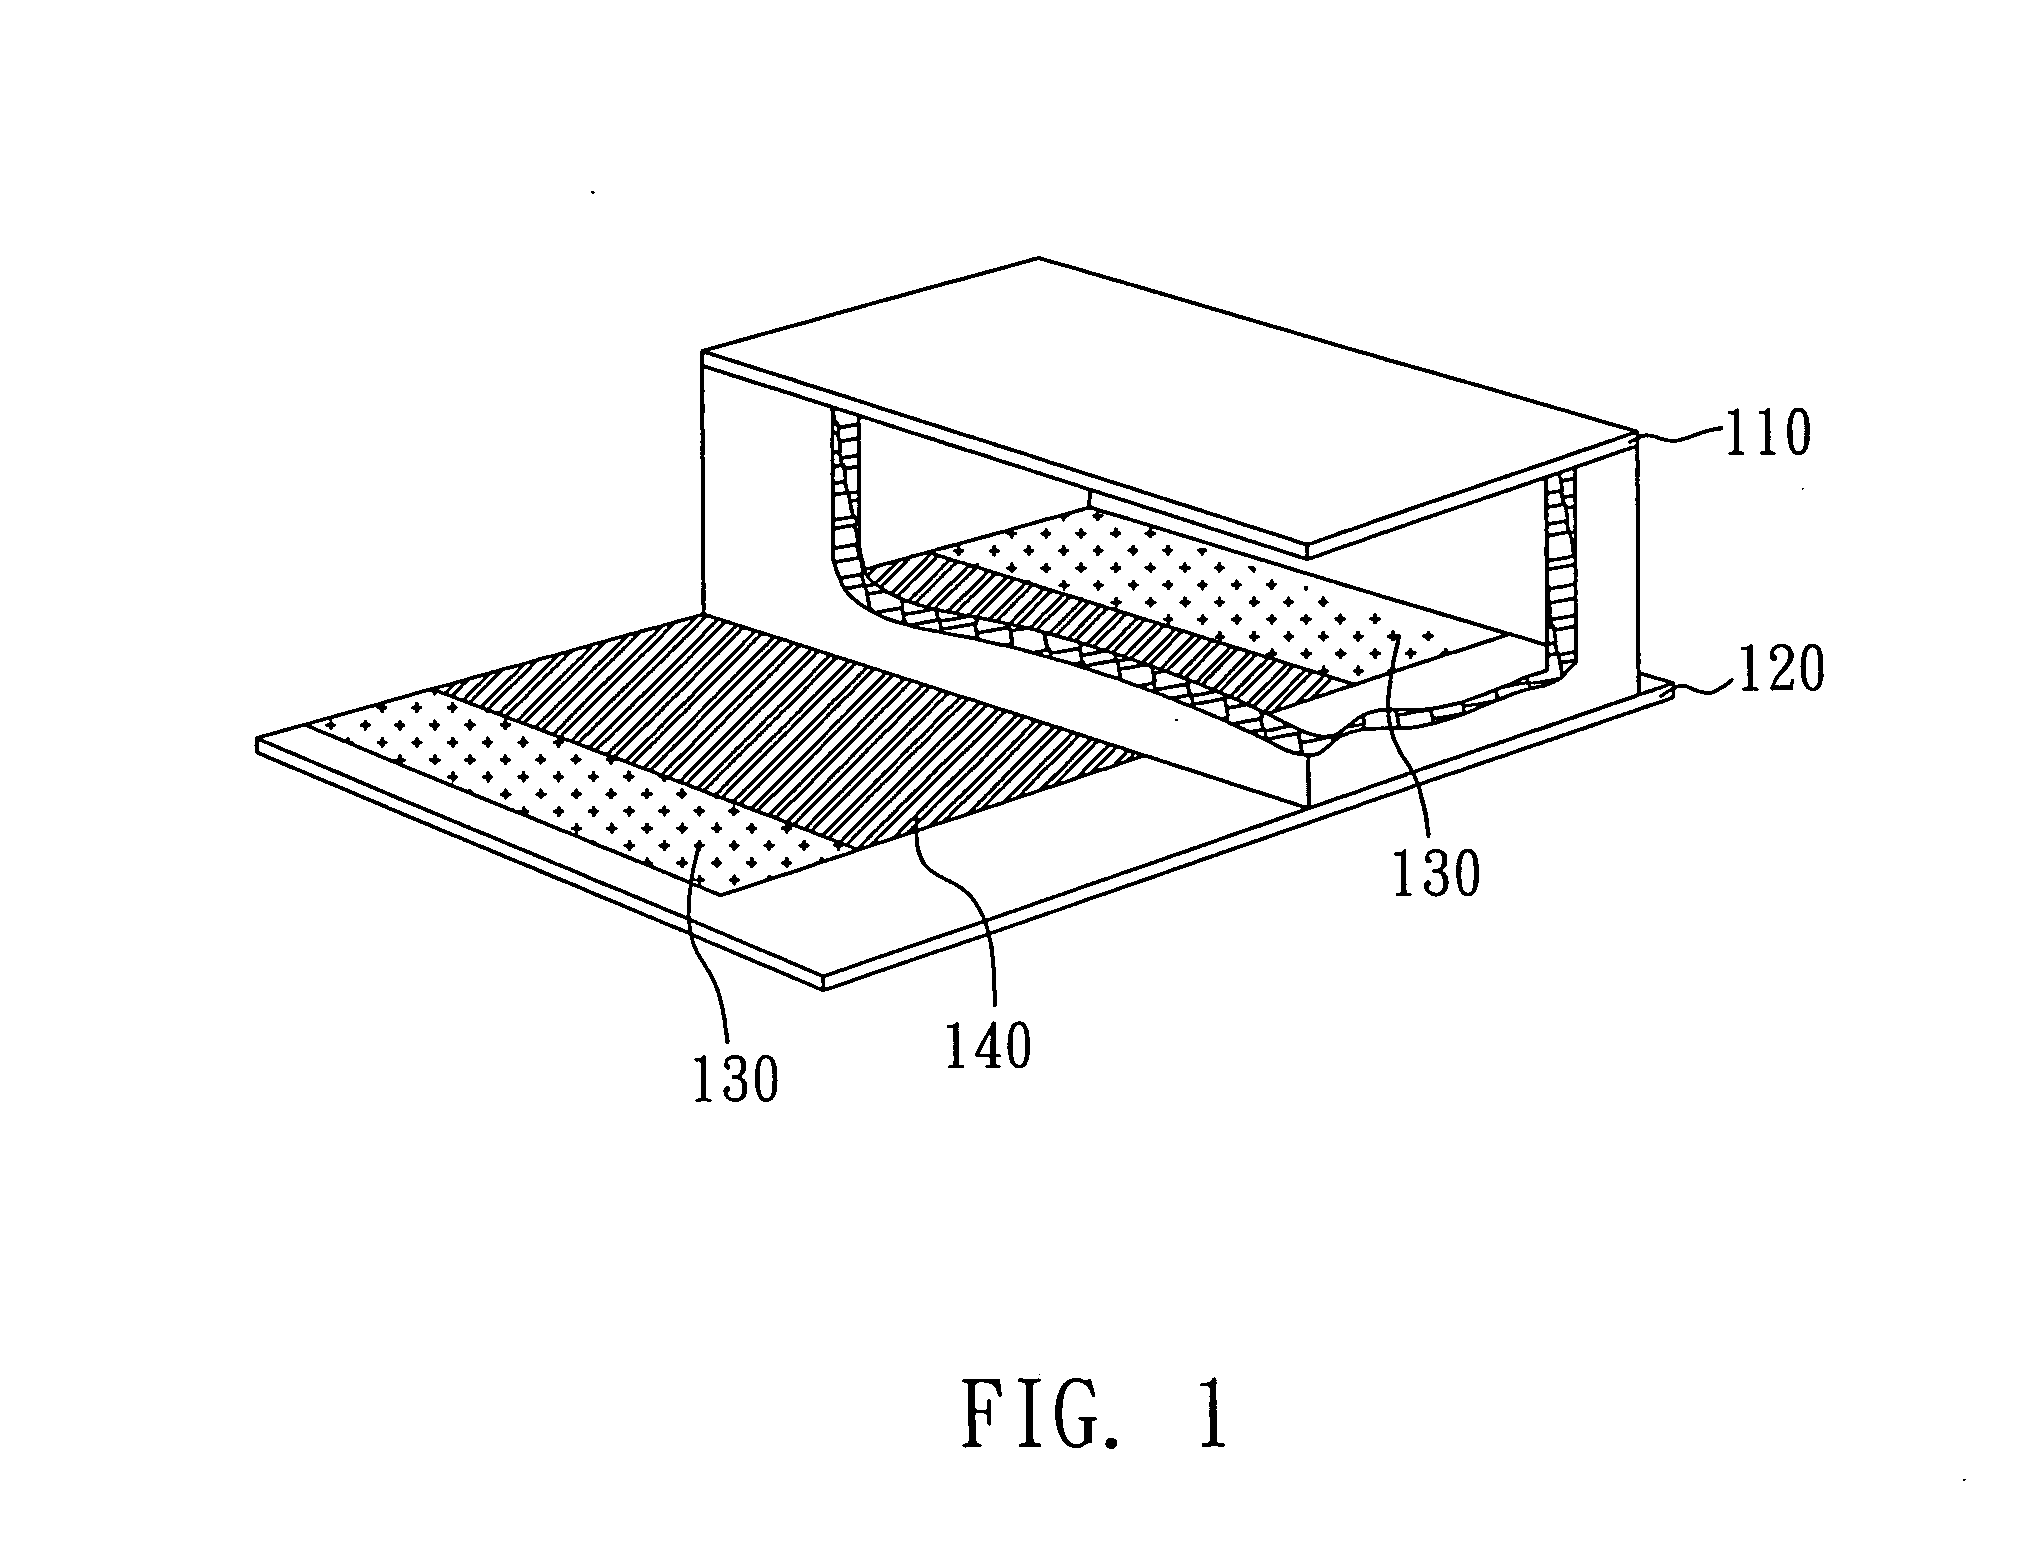 Anode plate for a field emission display device